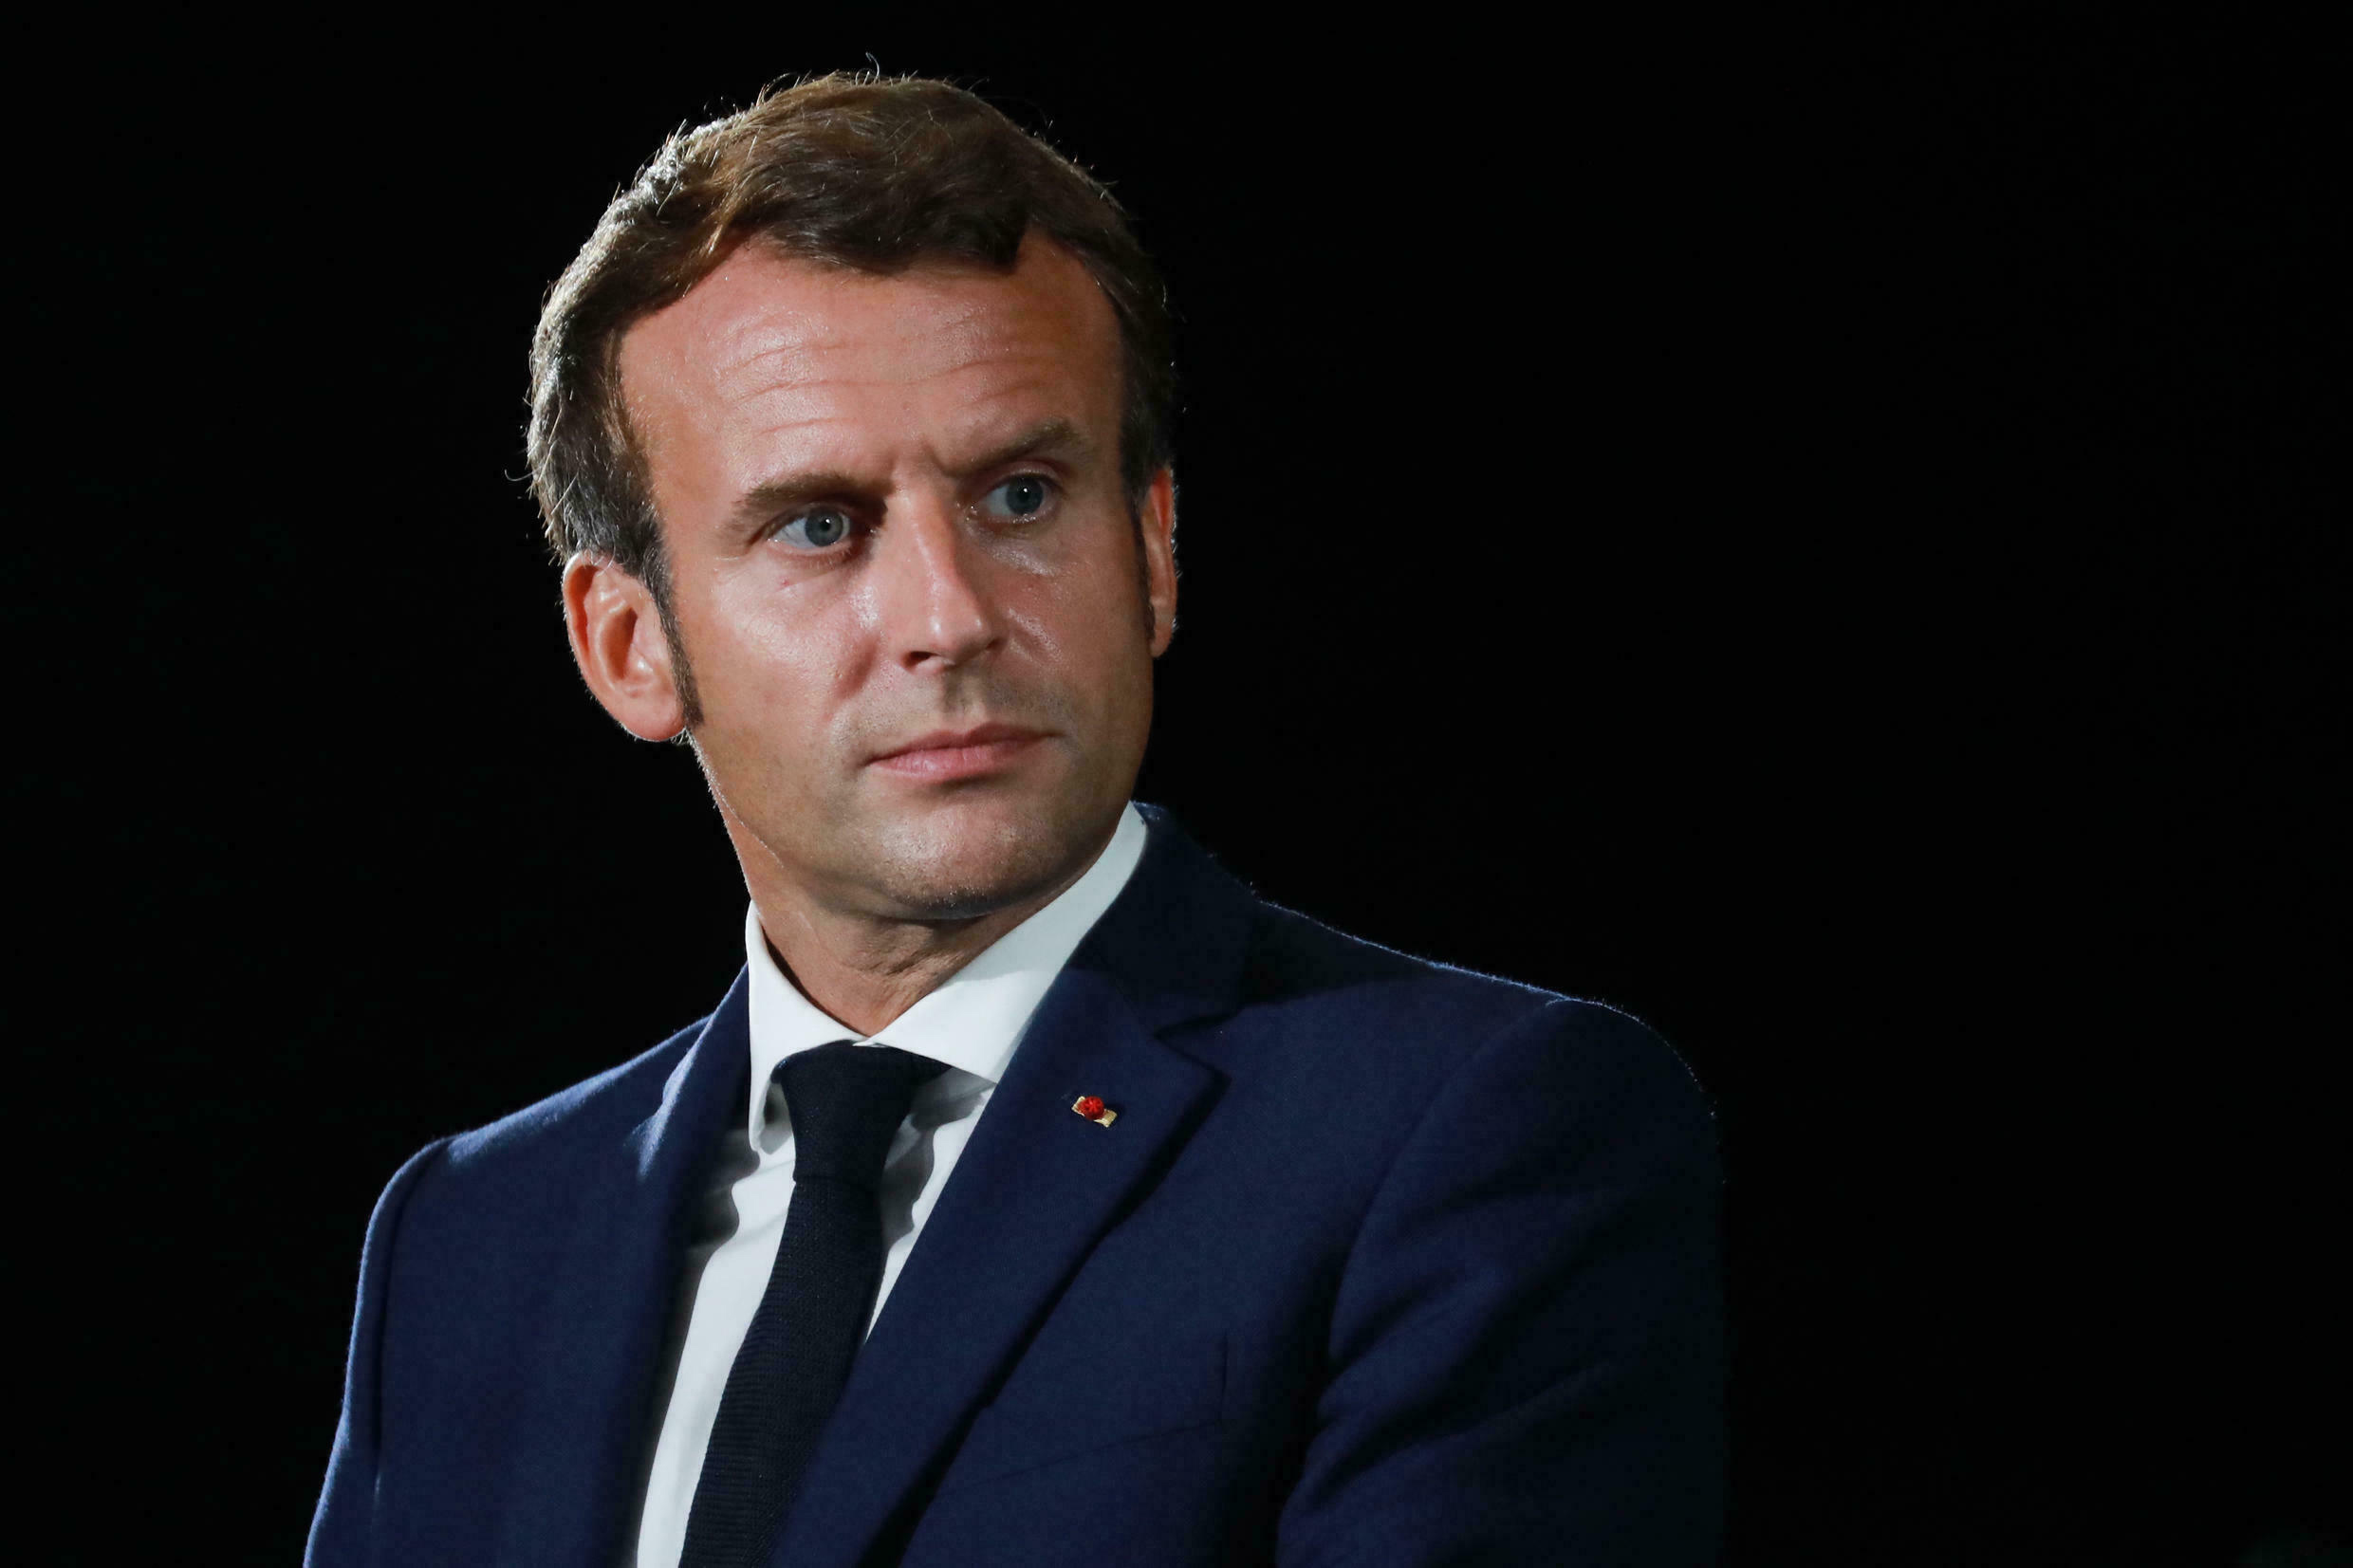 Macron Image Faces of the world Flickr